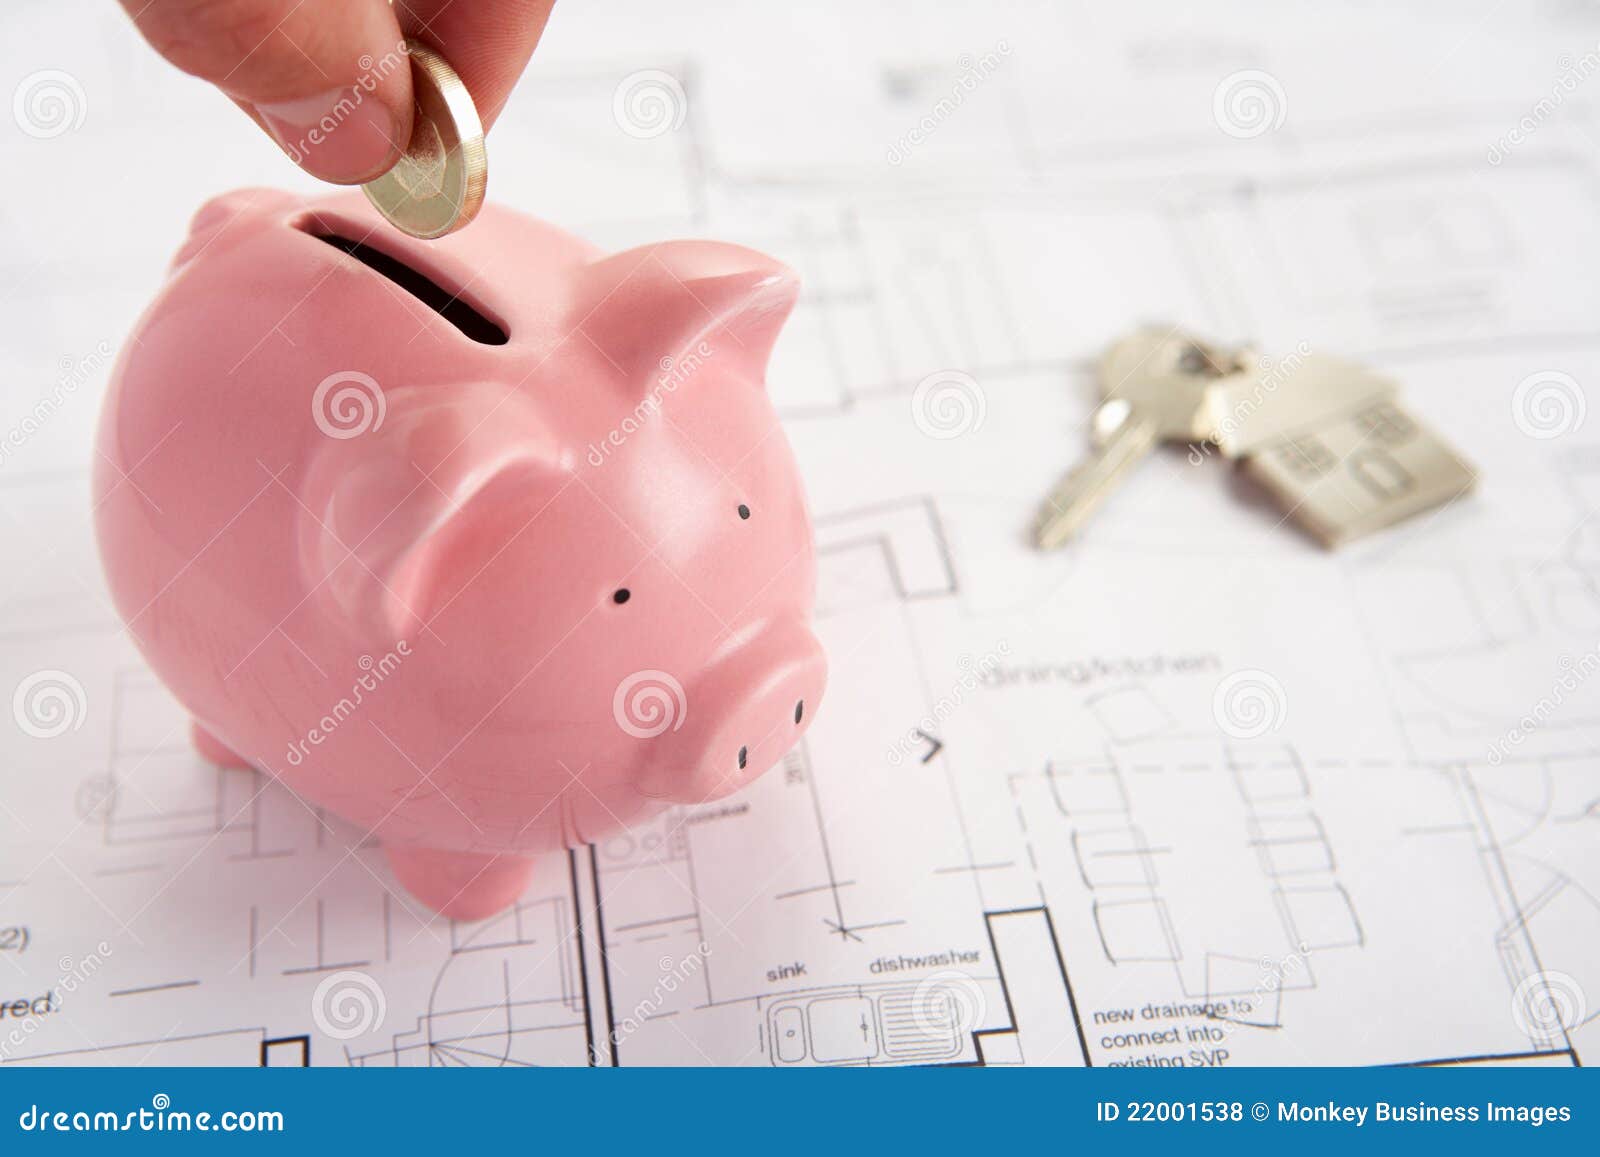 piggybank with house plans and keys